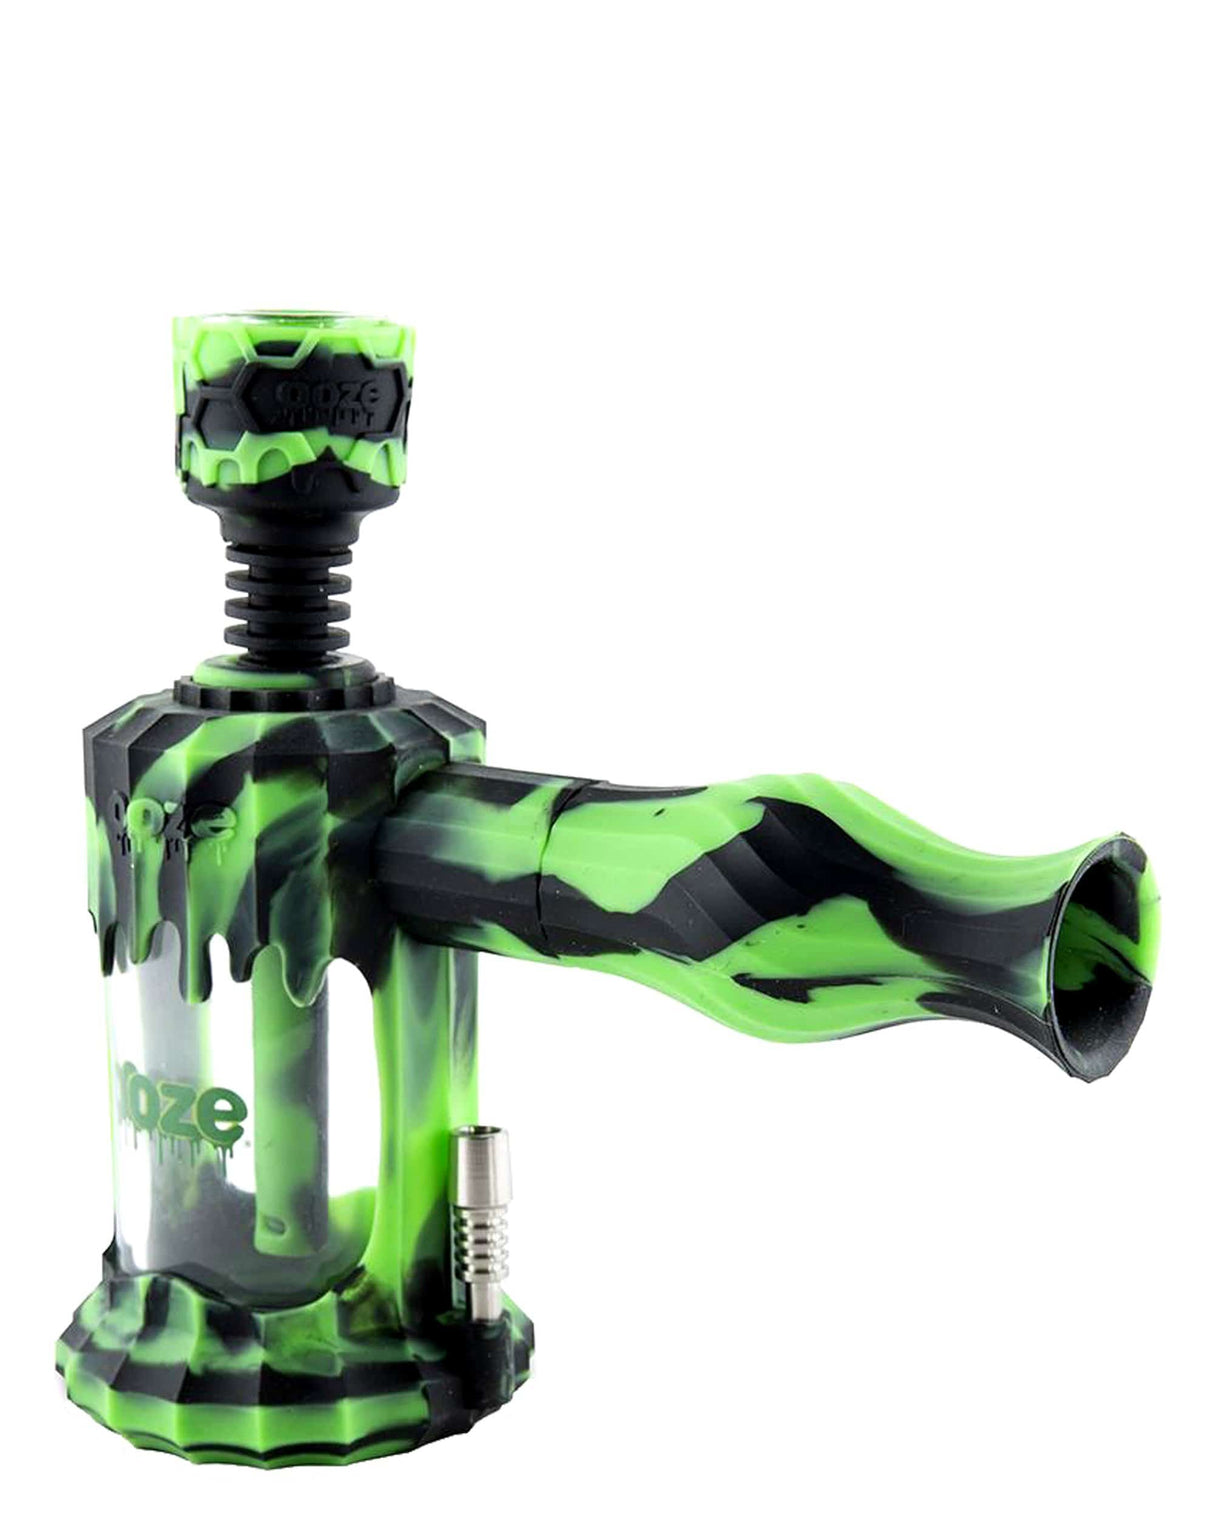 Ooze Clobb 4 in 1 Silicone Pipe in Rasta color, side view, for dry herbs and concentrates